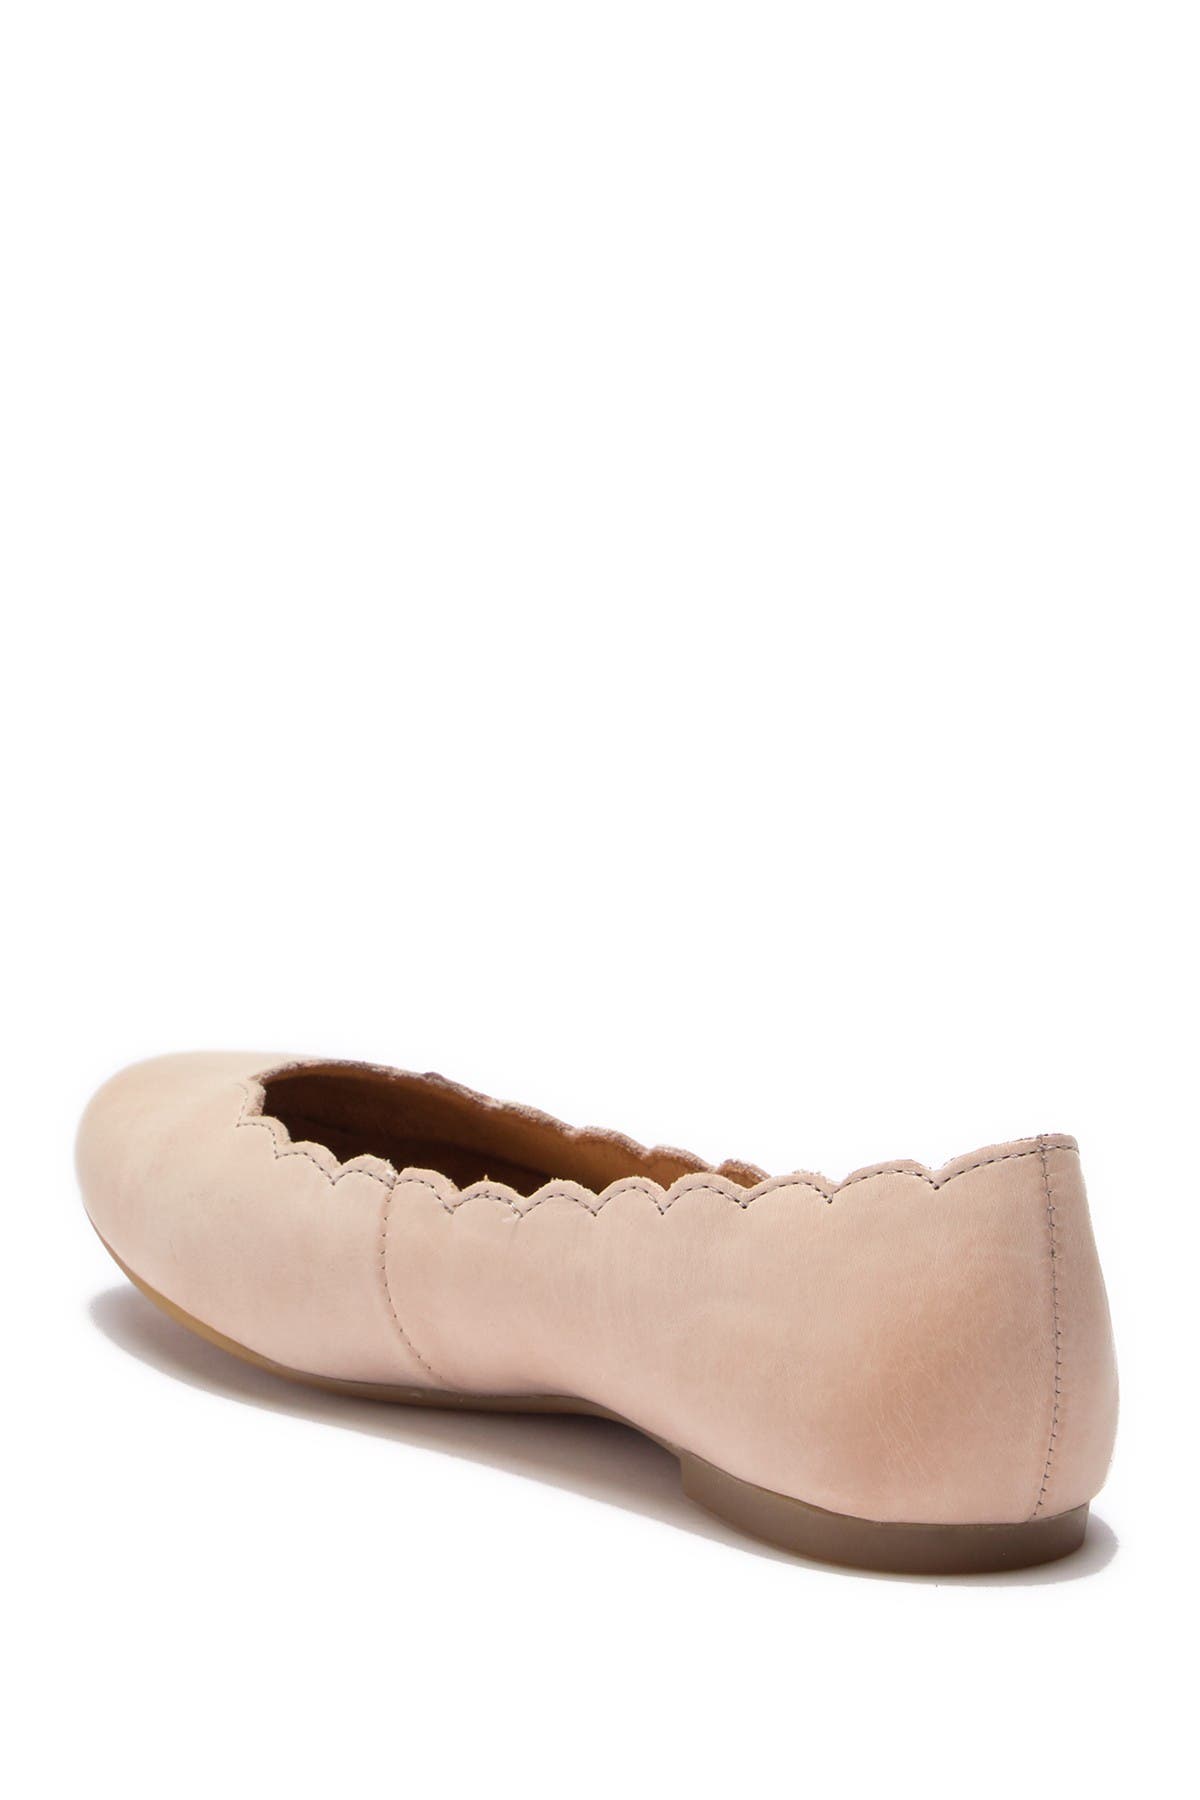 Born | Allie Scalloped Leather Flat 